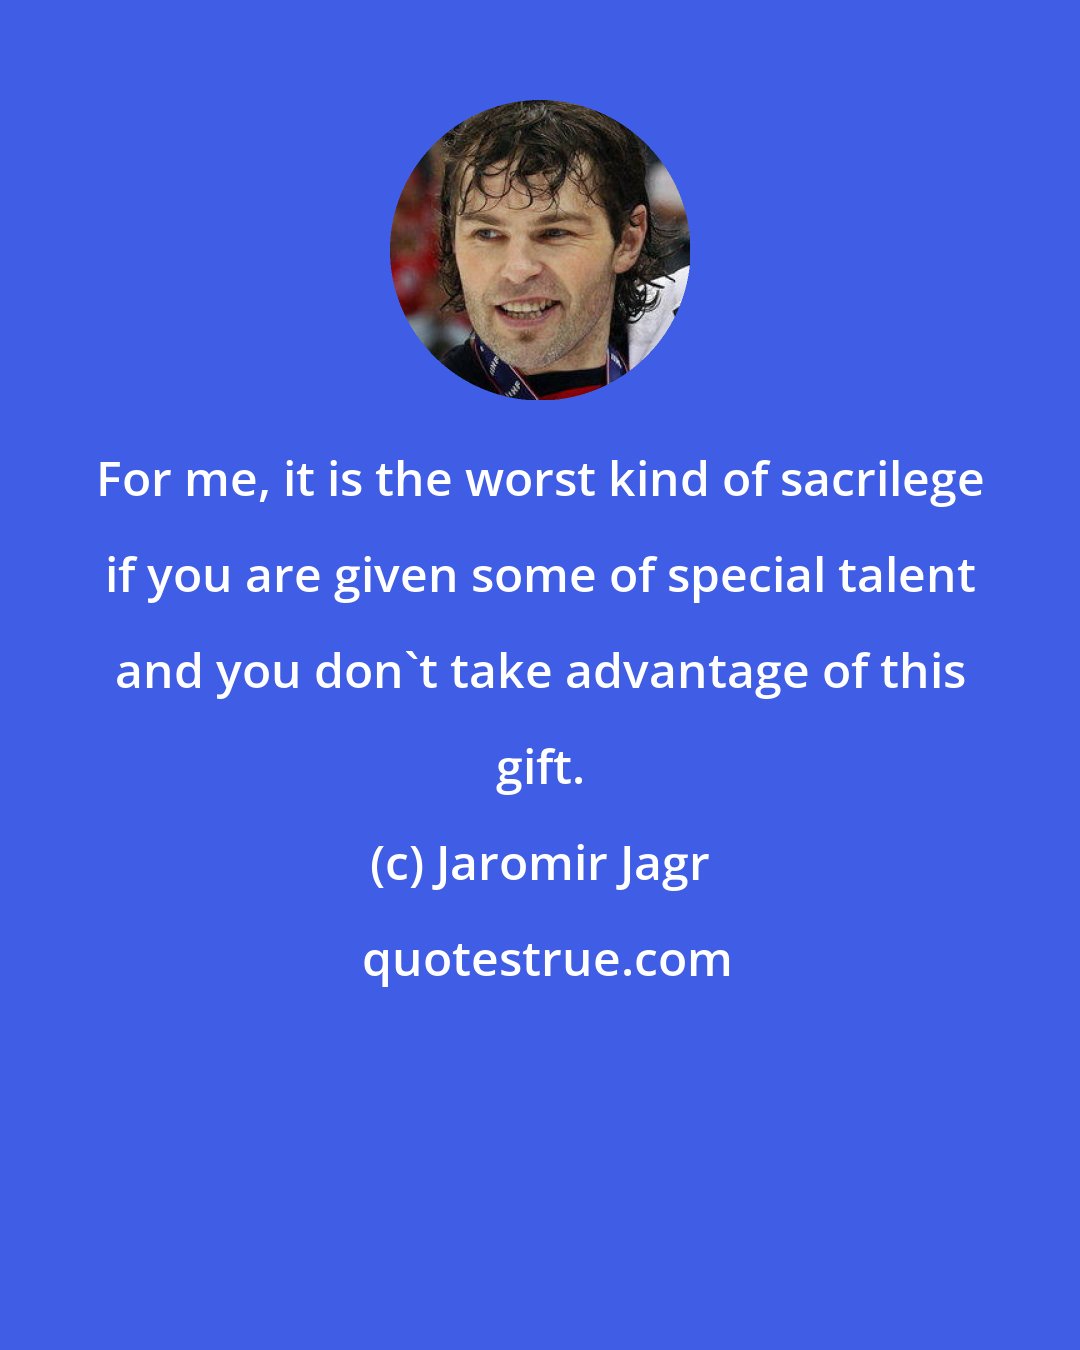 Jaromir Jagr: For me, it is the worst kind of sacrilege if you are given some of special talent and you don't take advantage of this gift.